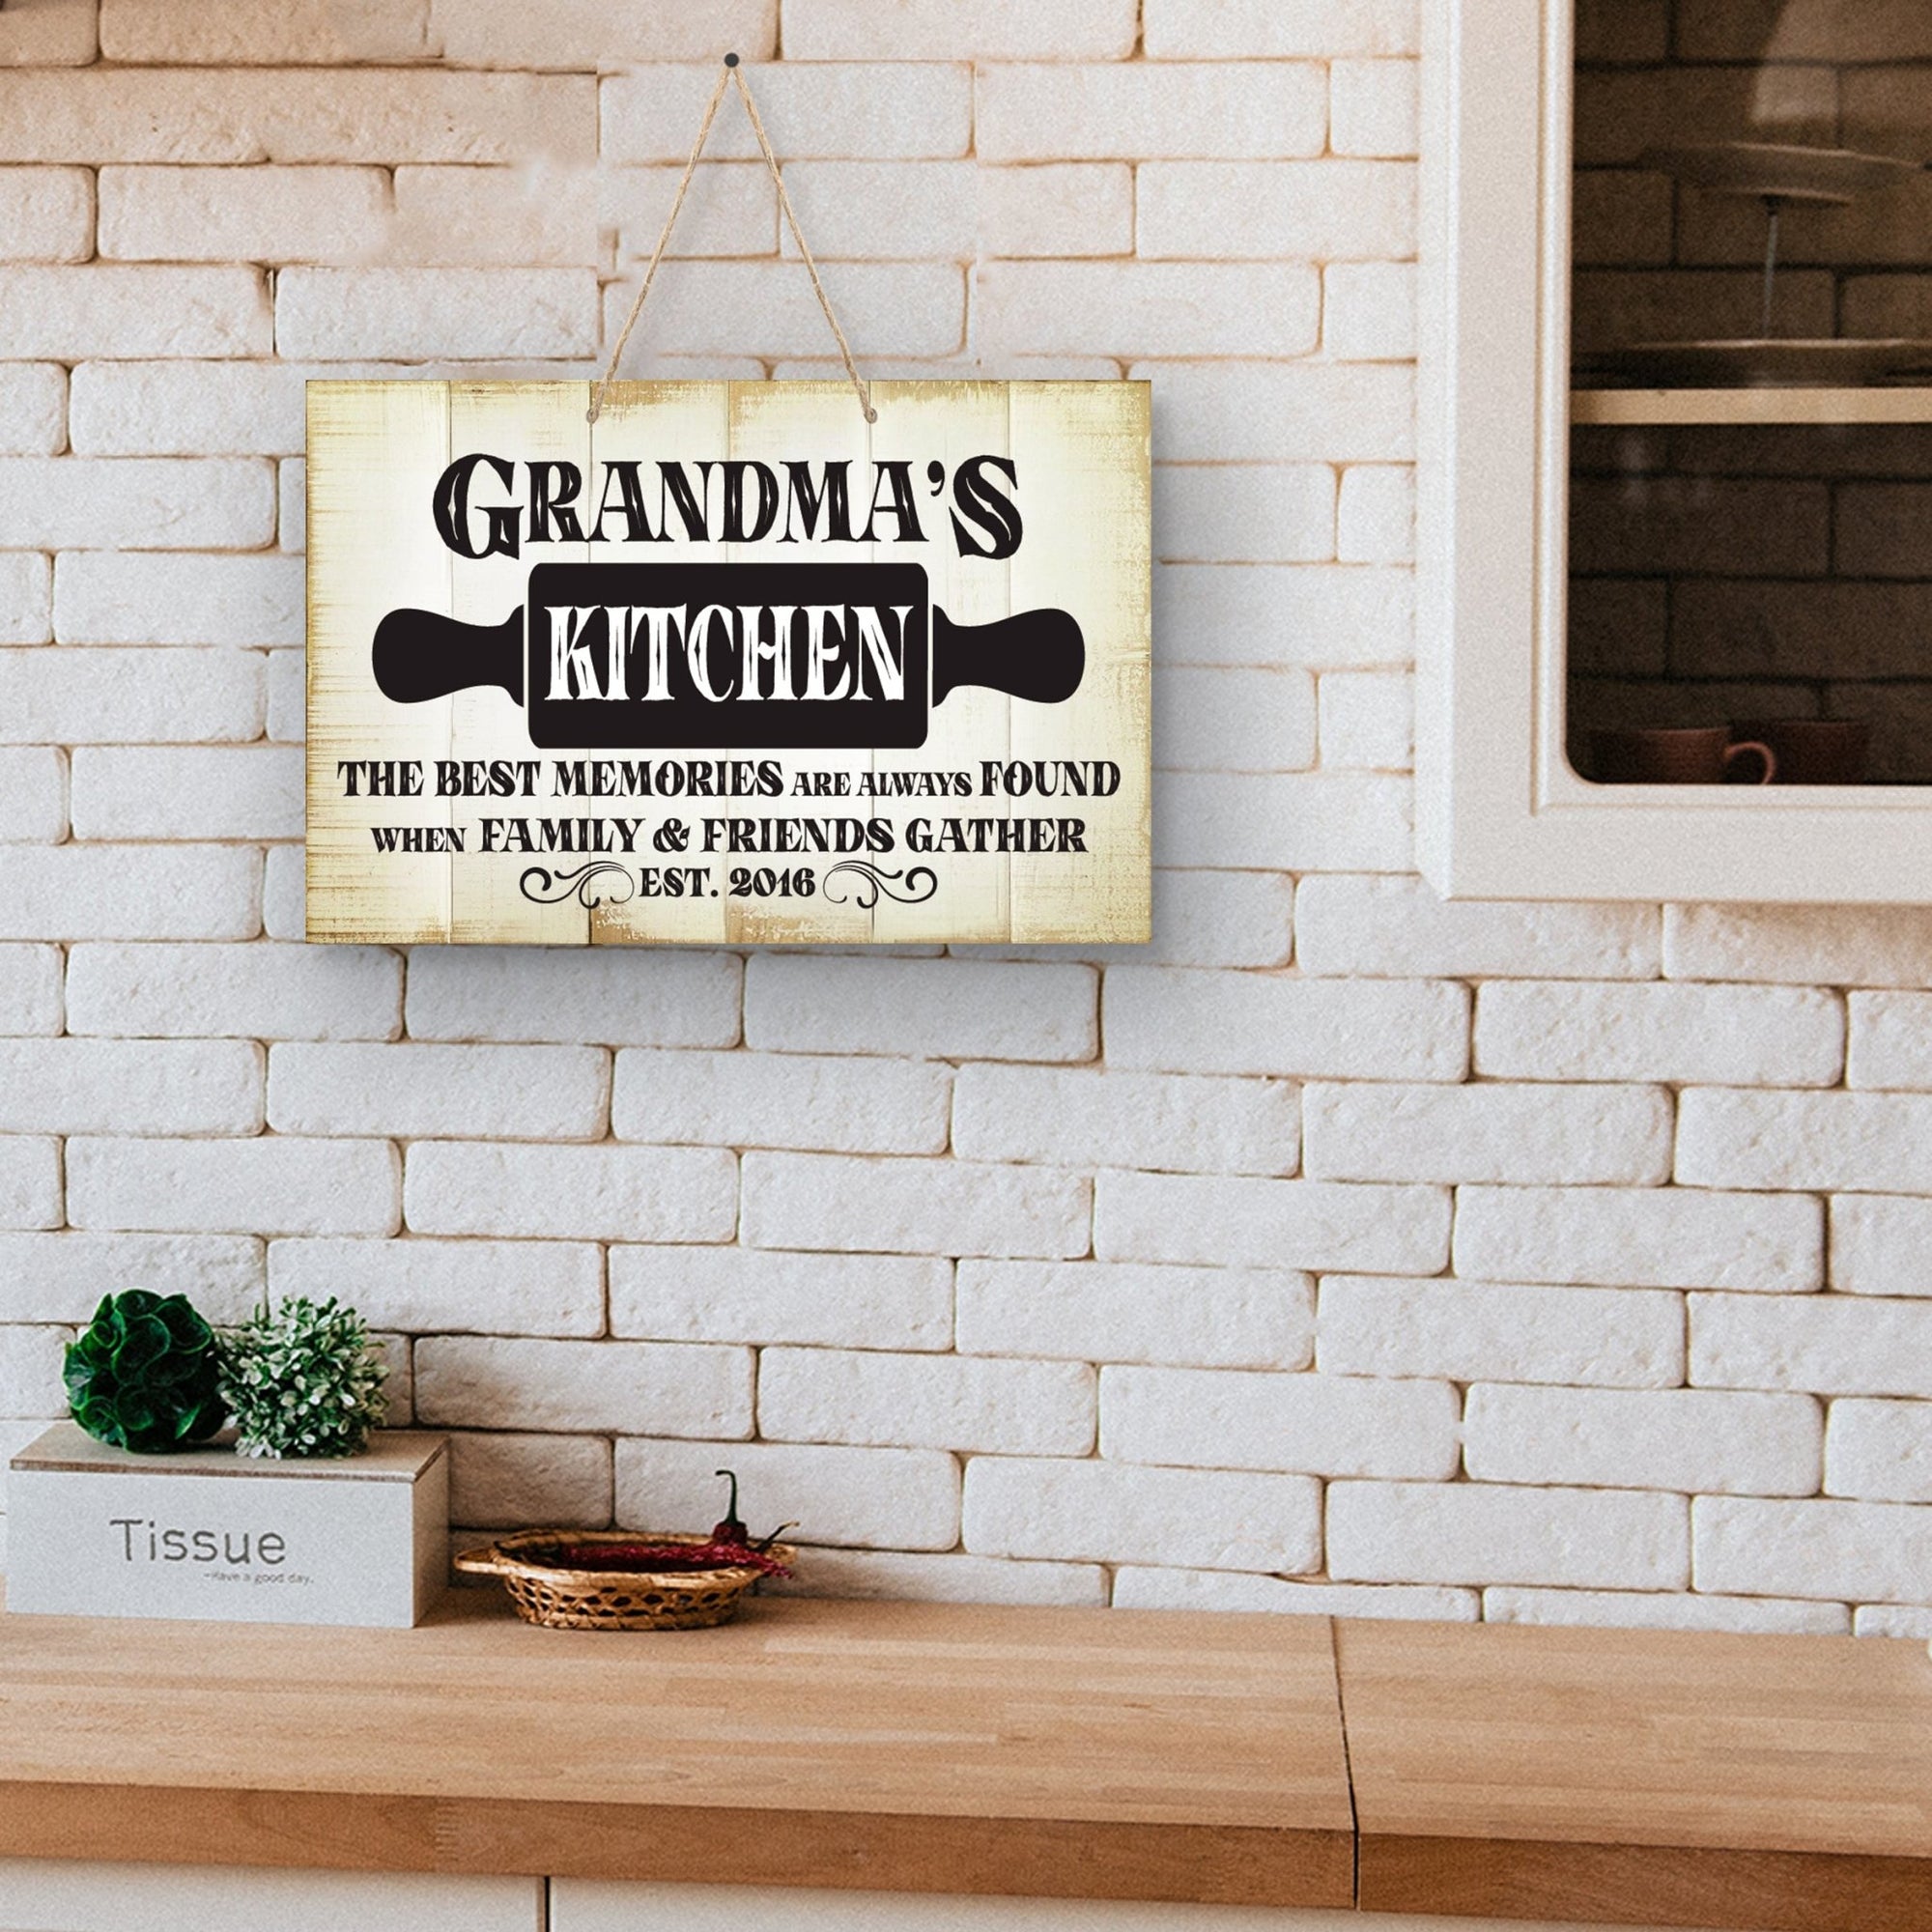 Inspirational Wooden Rustic Wall Hanging Rope Sign Kitchen Home Décor - The Best Memories [KITCHEN] - LifeSong Milestones